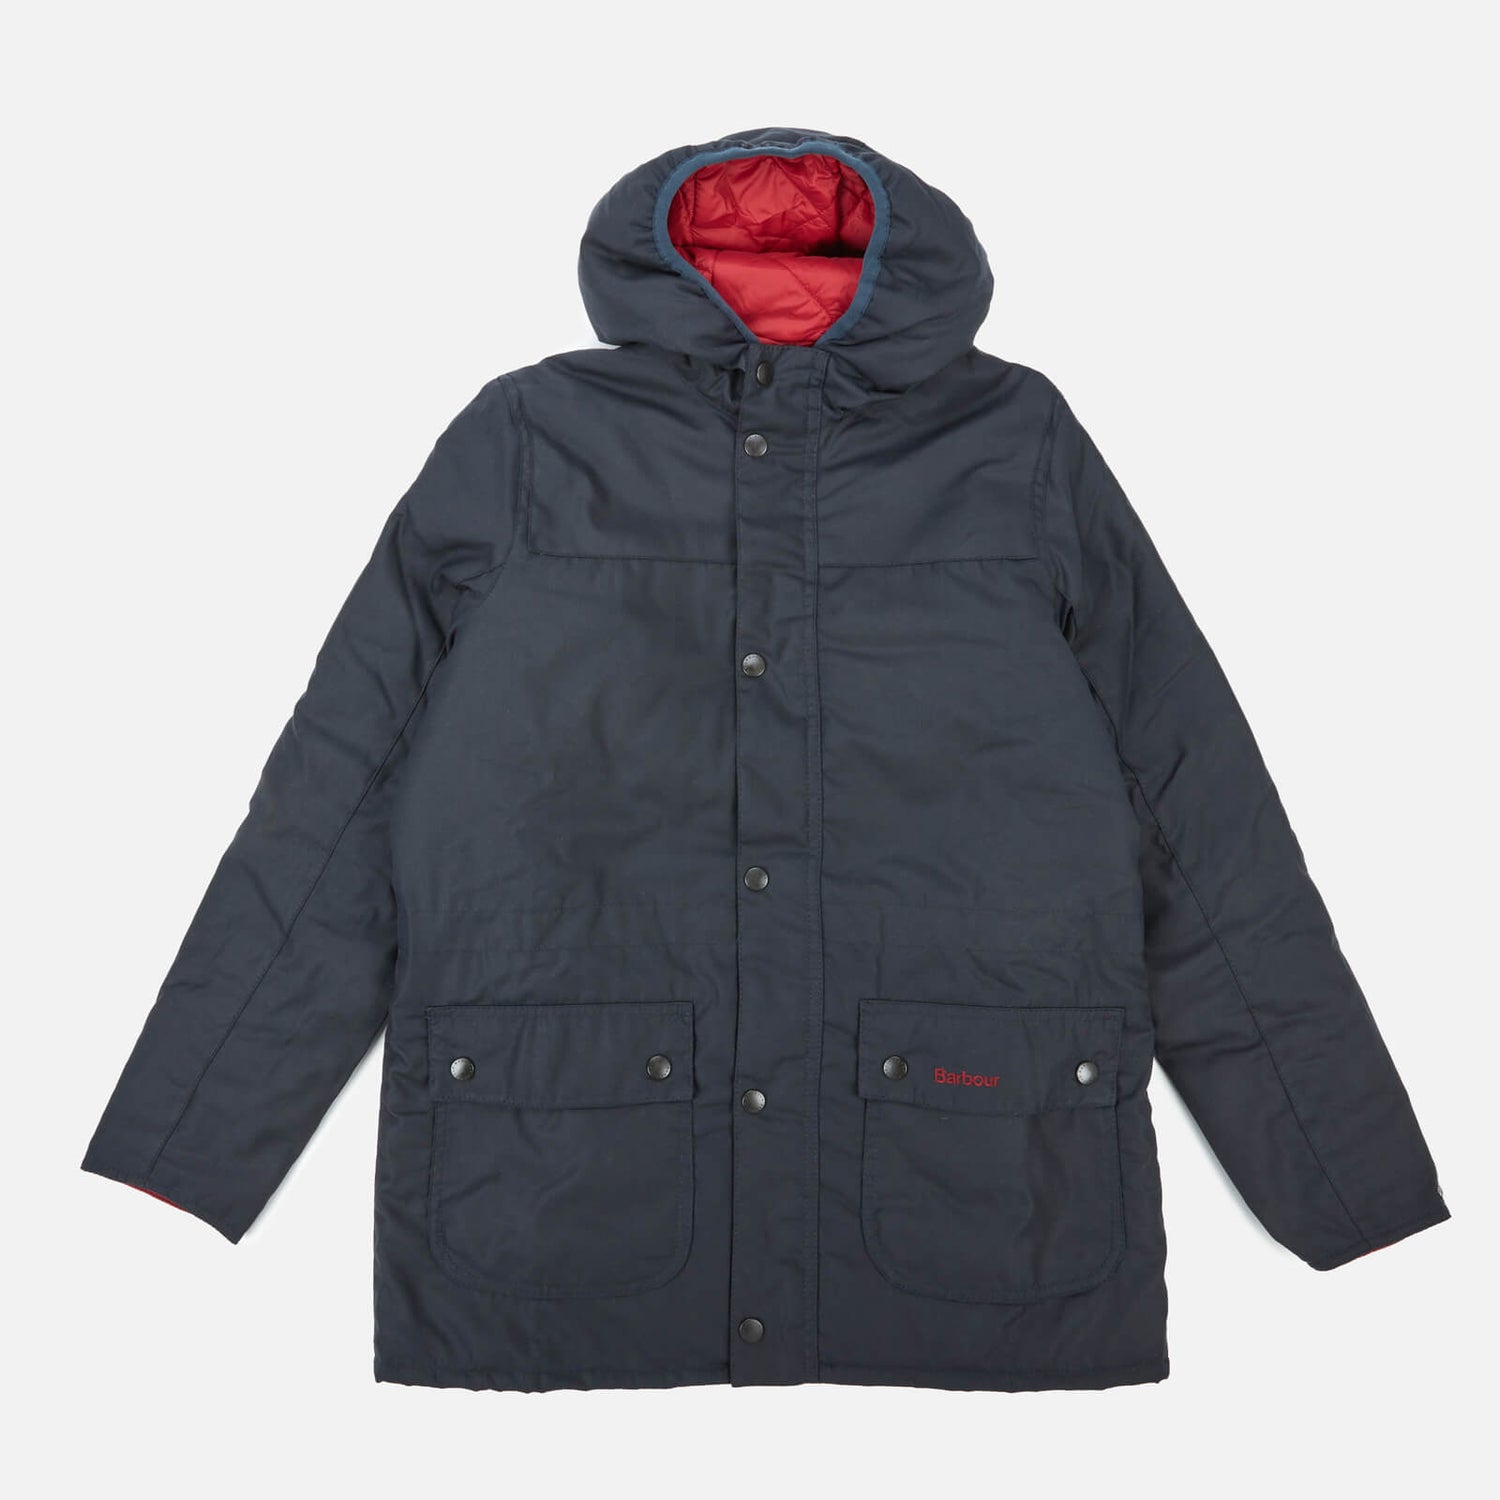 Barbour Heritage Boys' Durham Wax Jacket - Navy/Red - S (6-7) Years